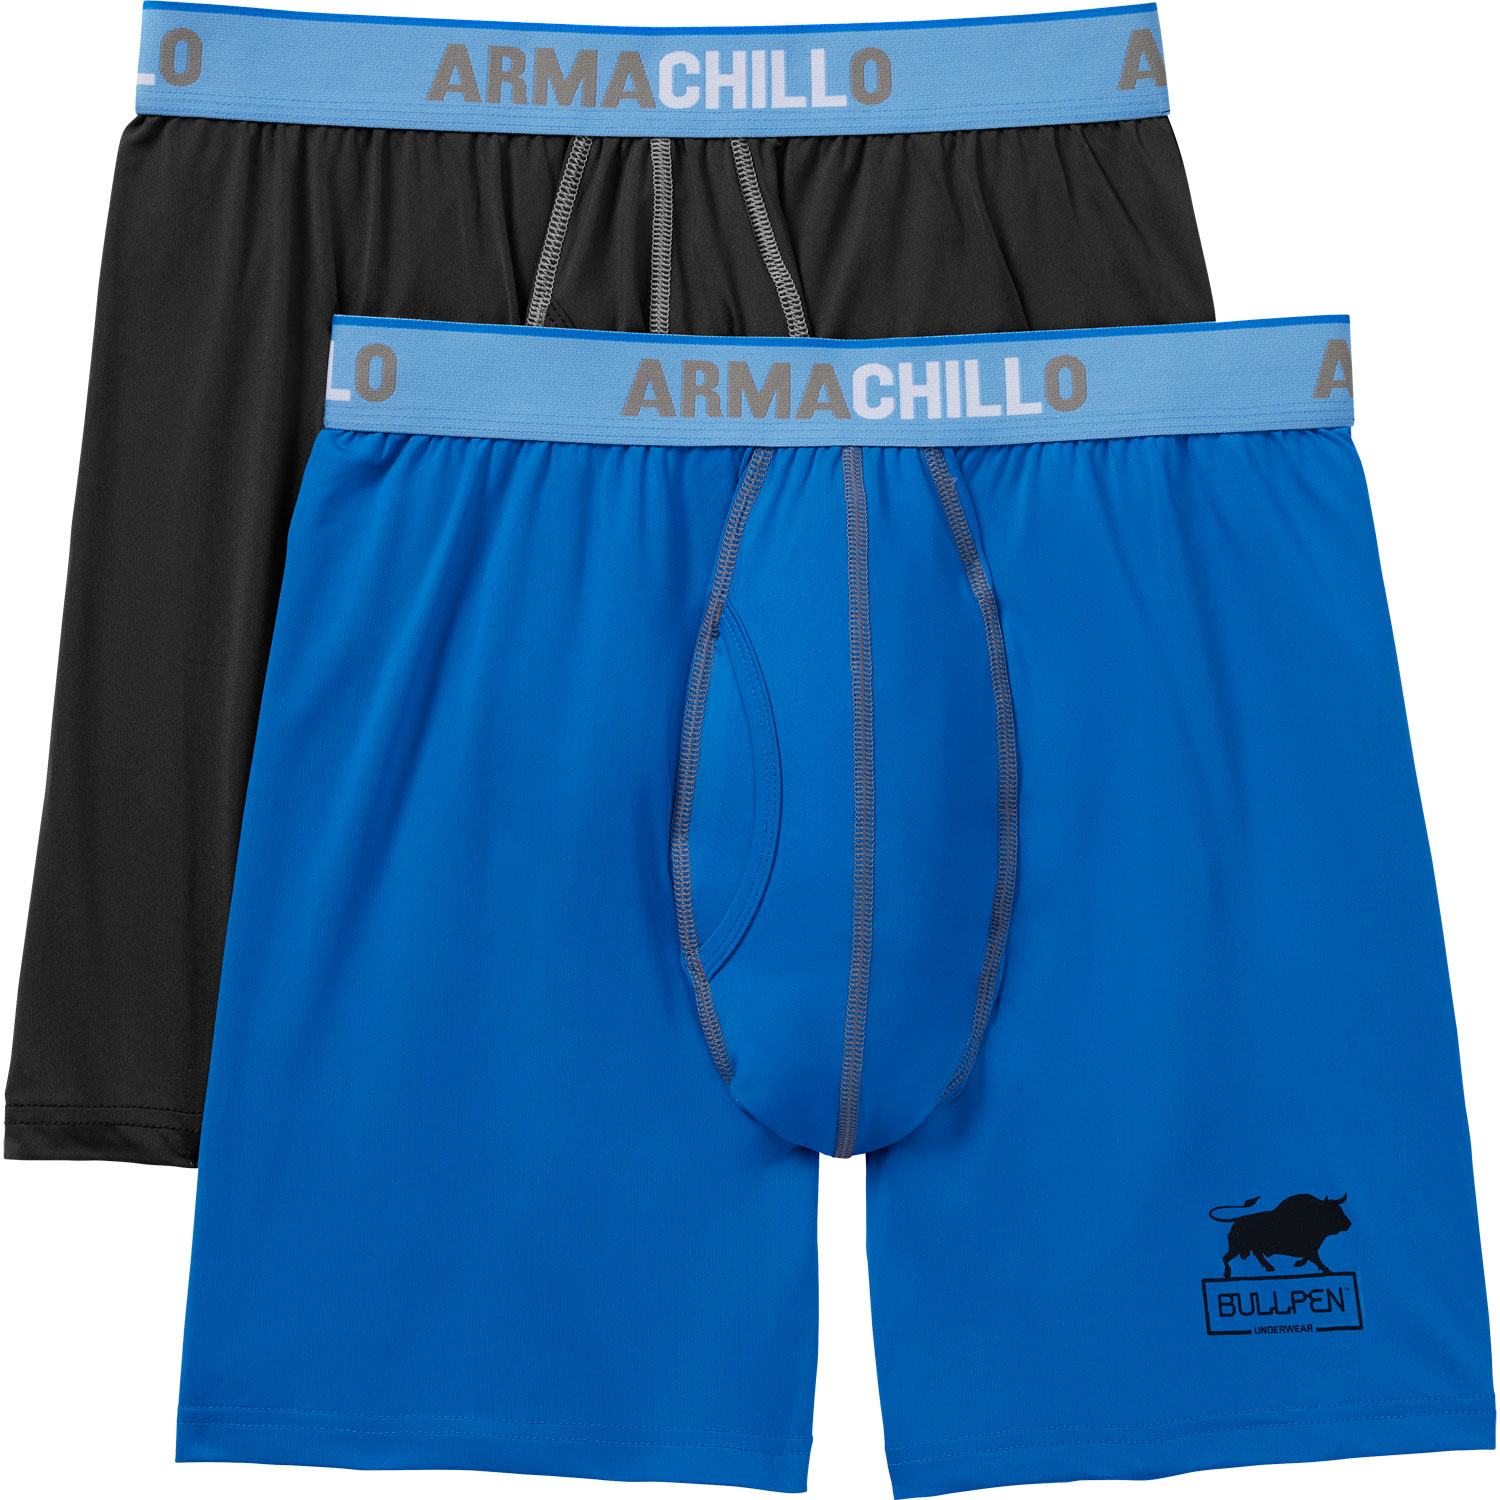 Duluth Trading Co Mens Armachillo Cooling Briefs in Lagoon 15274